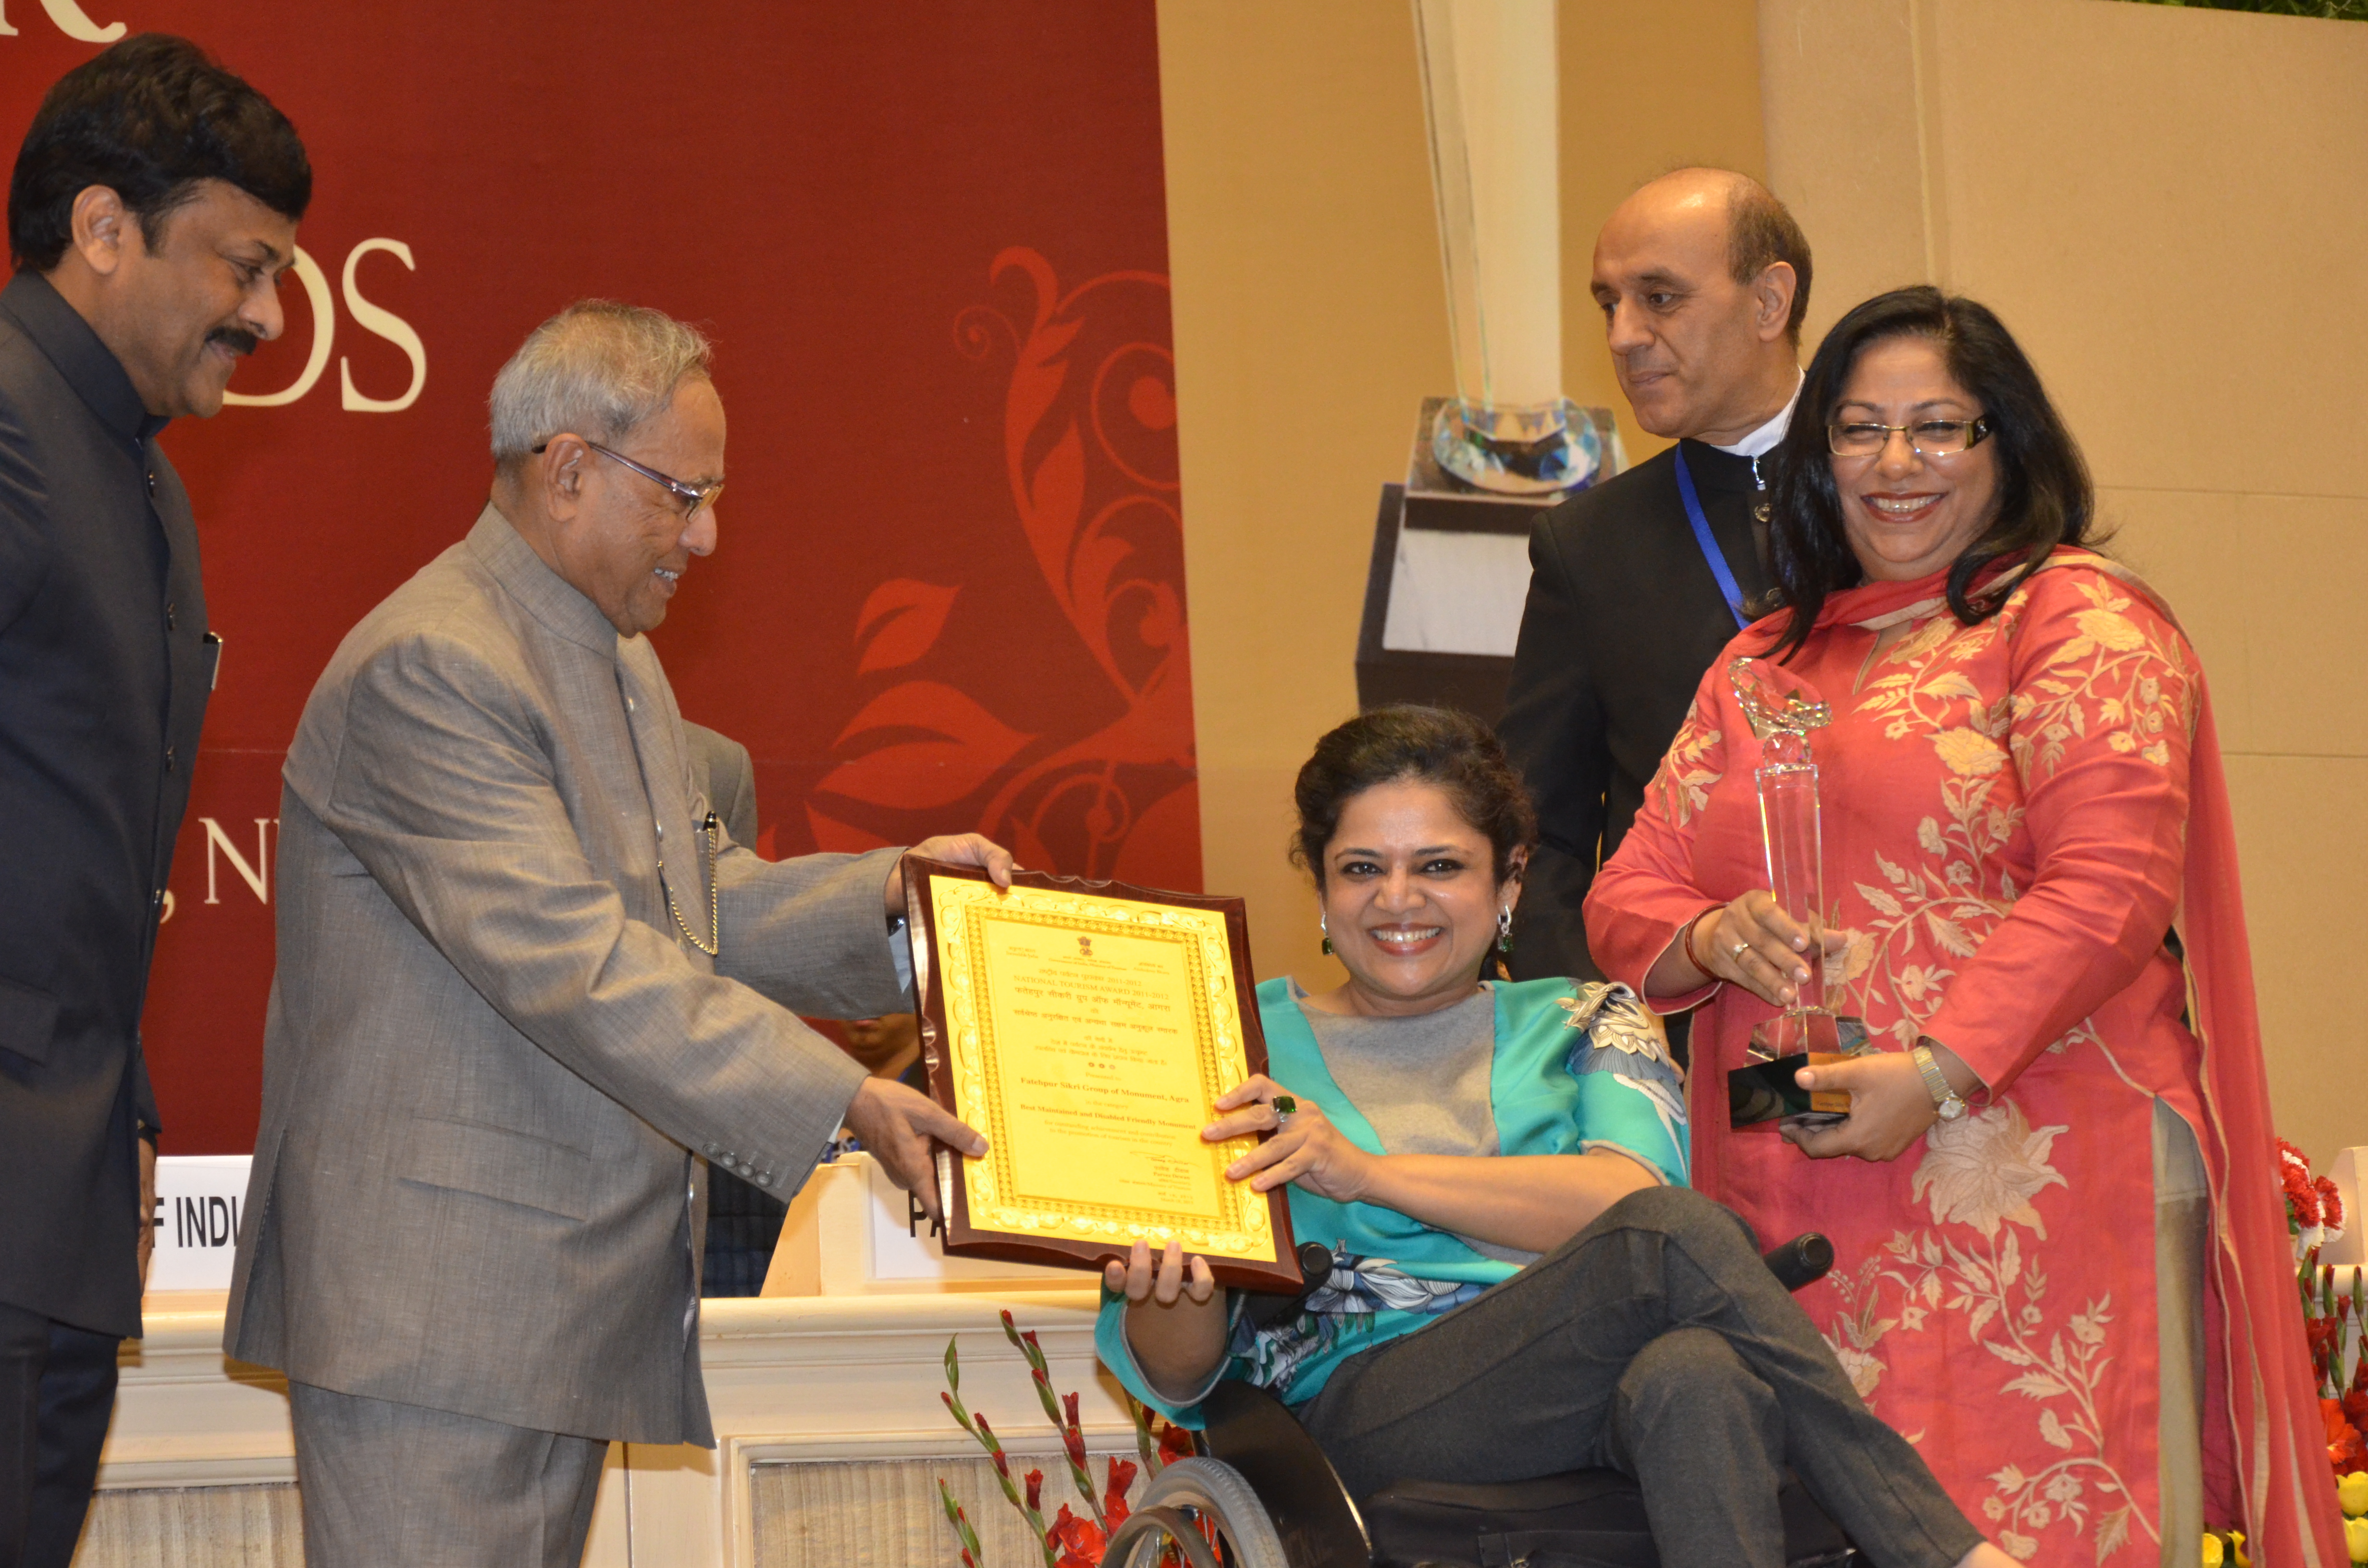 Picture of Svayam Founder Ms. Sminu Jindal receiving the award at the hands of Hon'ble President of India Mr. Pranab Mukherjee